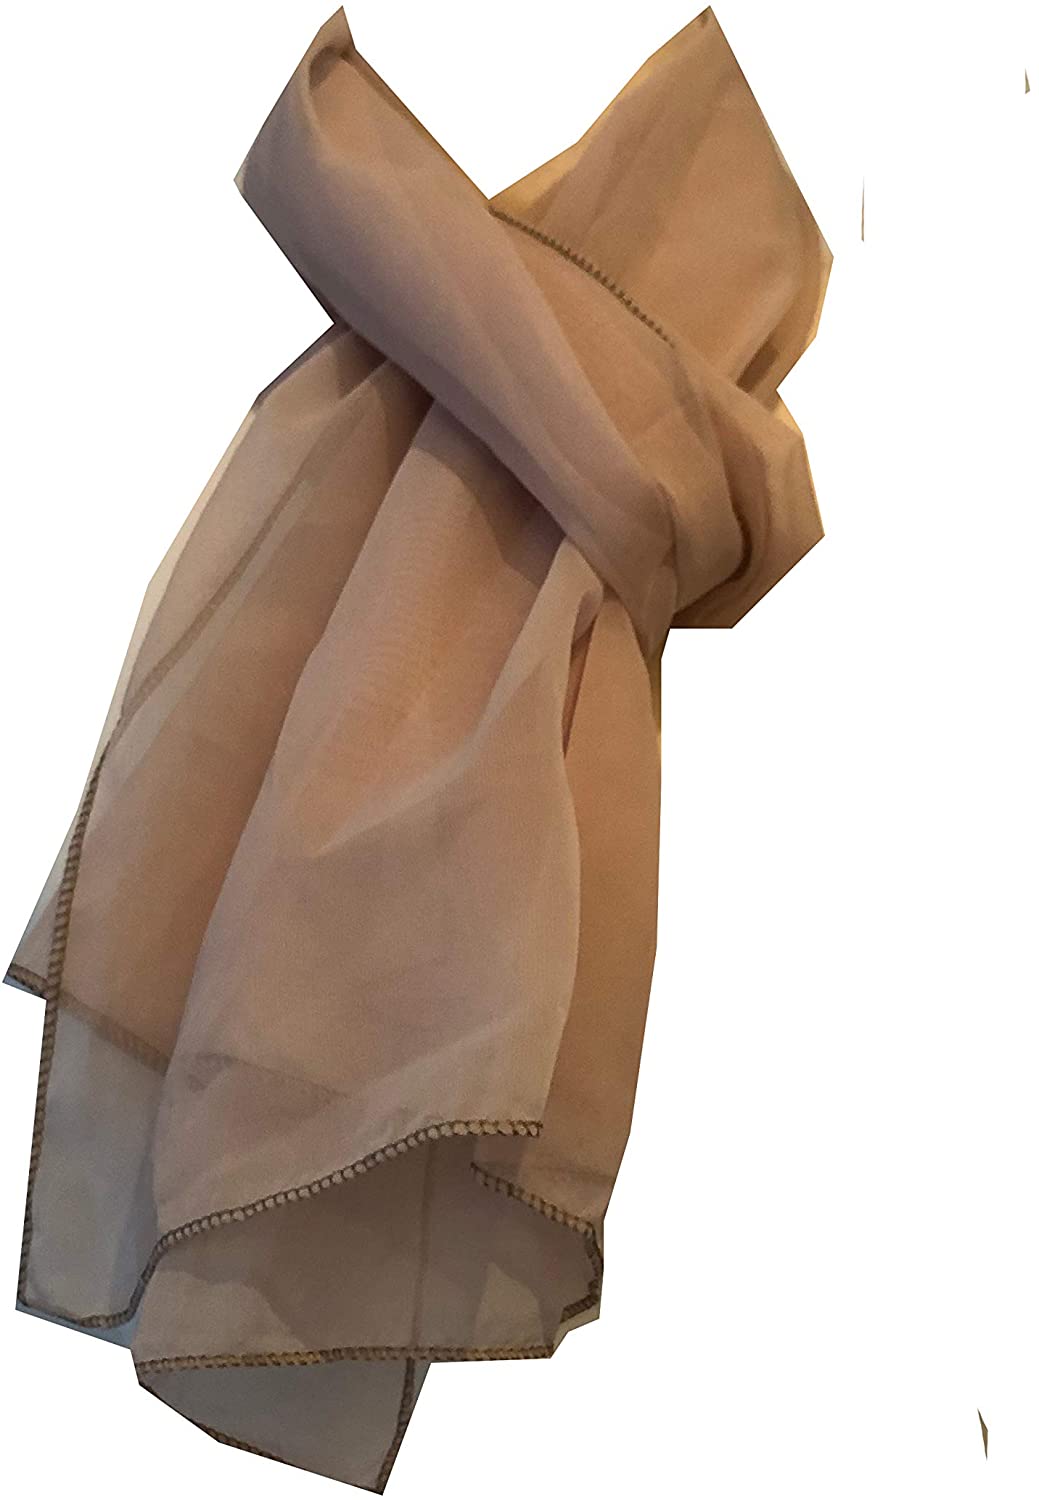 Plain Beige Chiffon Style Scarf Thin Pretty Scarf Great for Any Outfit Lovely Gift